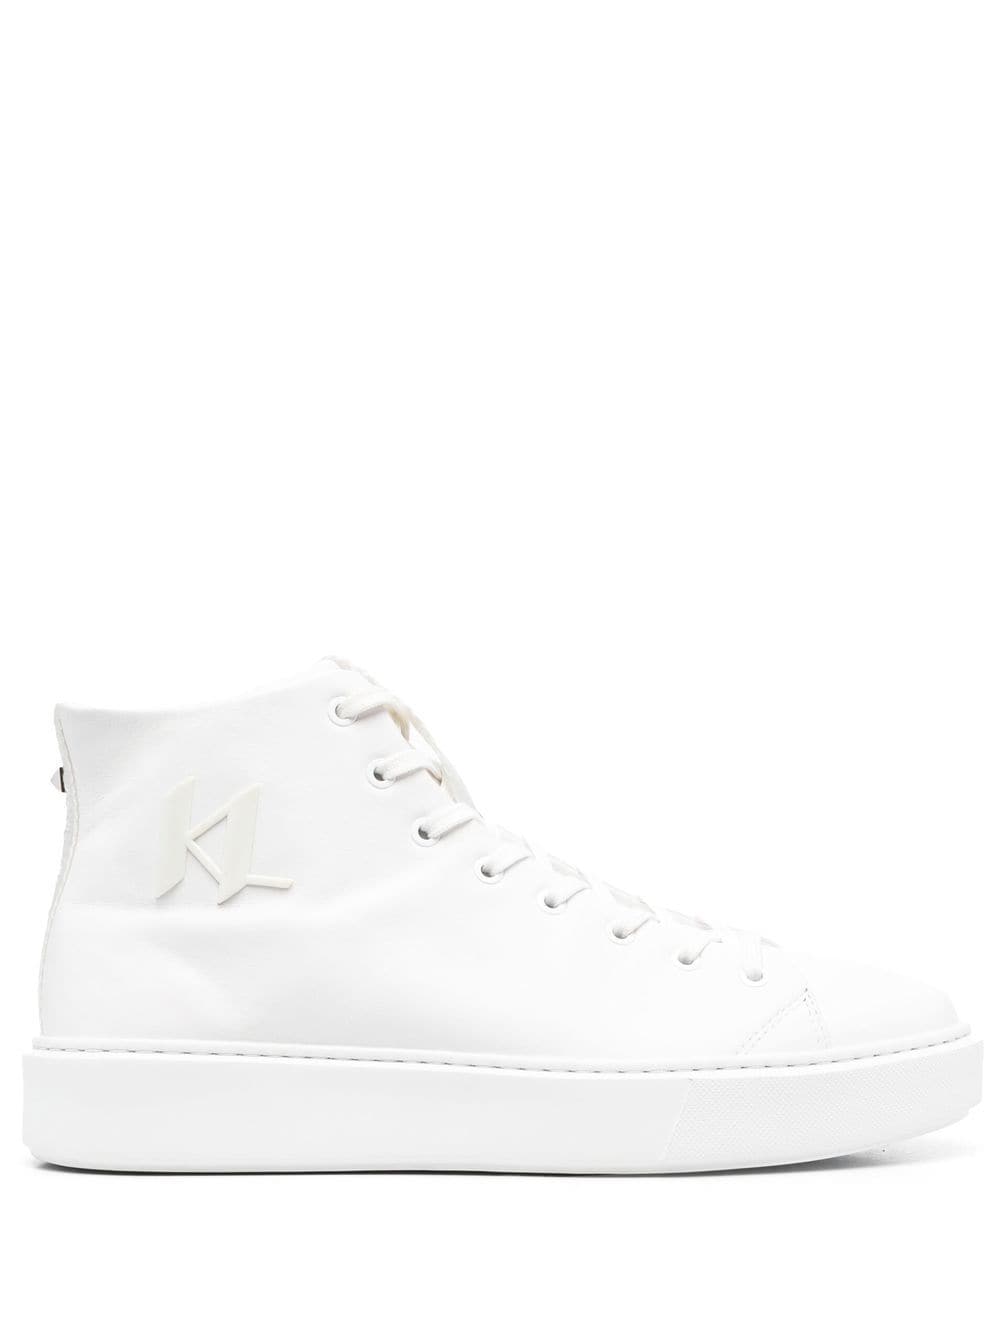 Karl Lagerfeld Maxi Kup High-top Sneakers In White